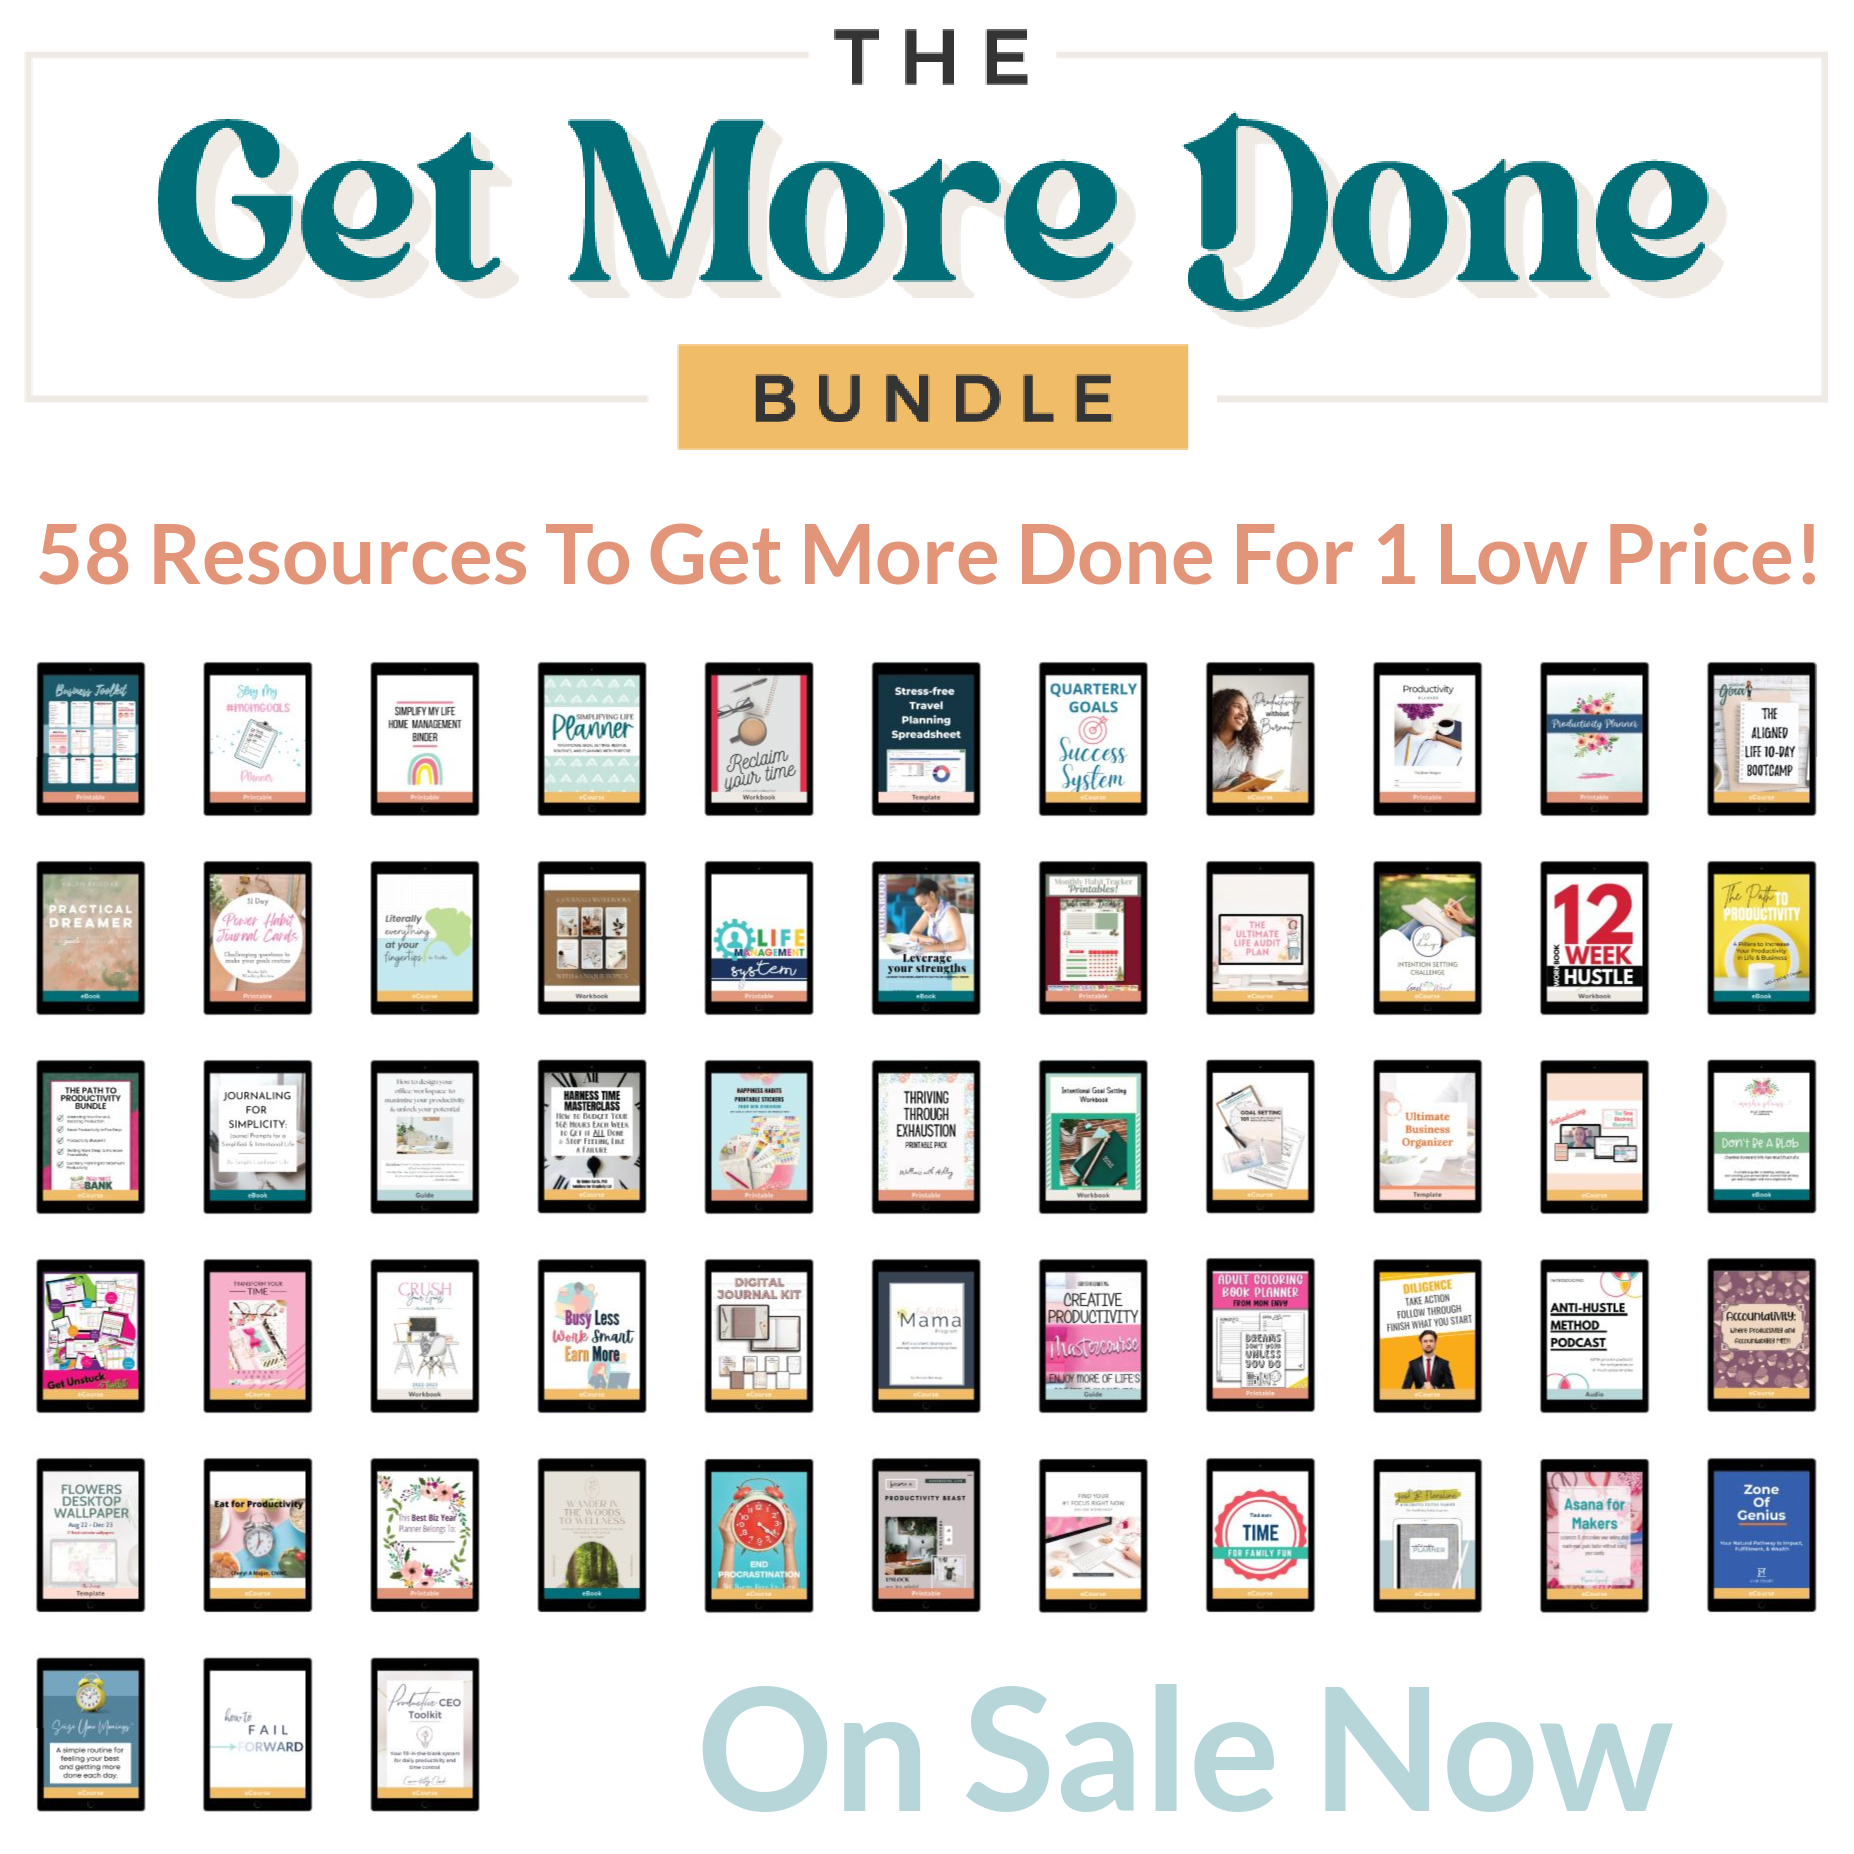 All the products in the Get More Done Bundle